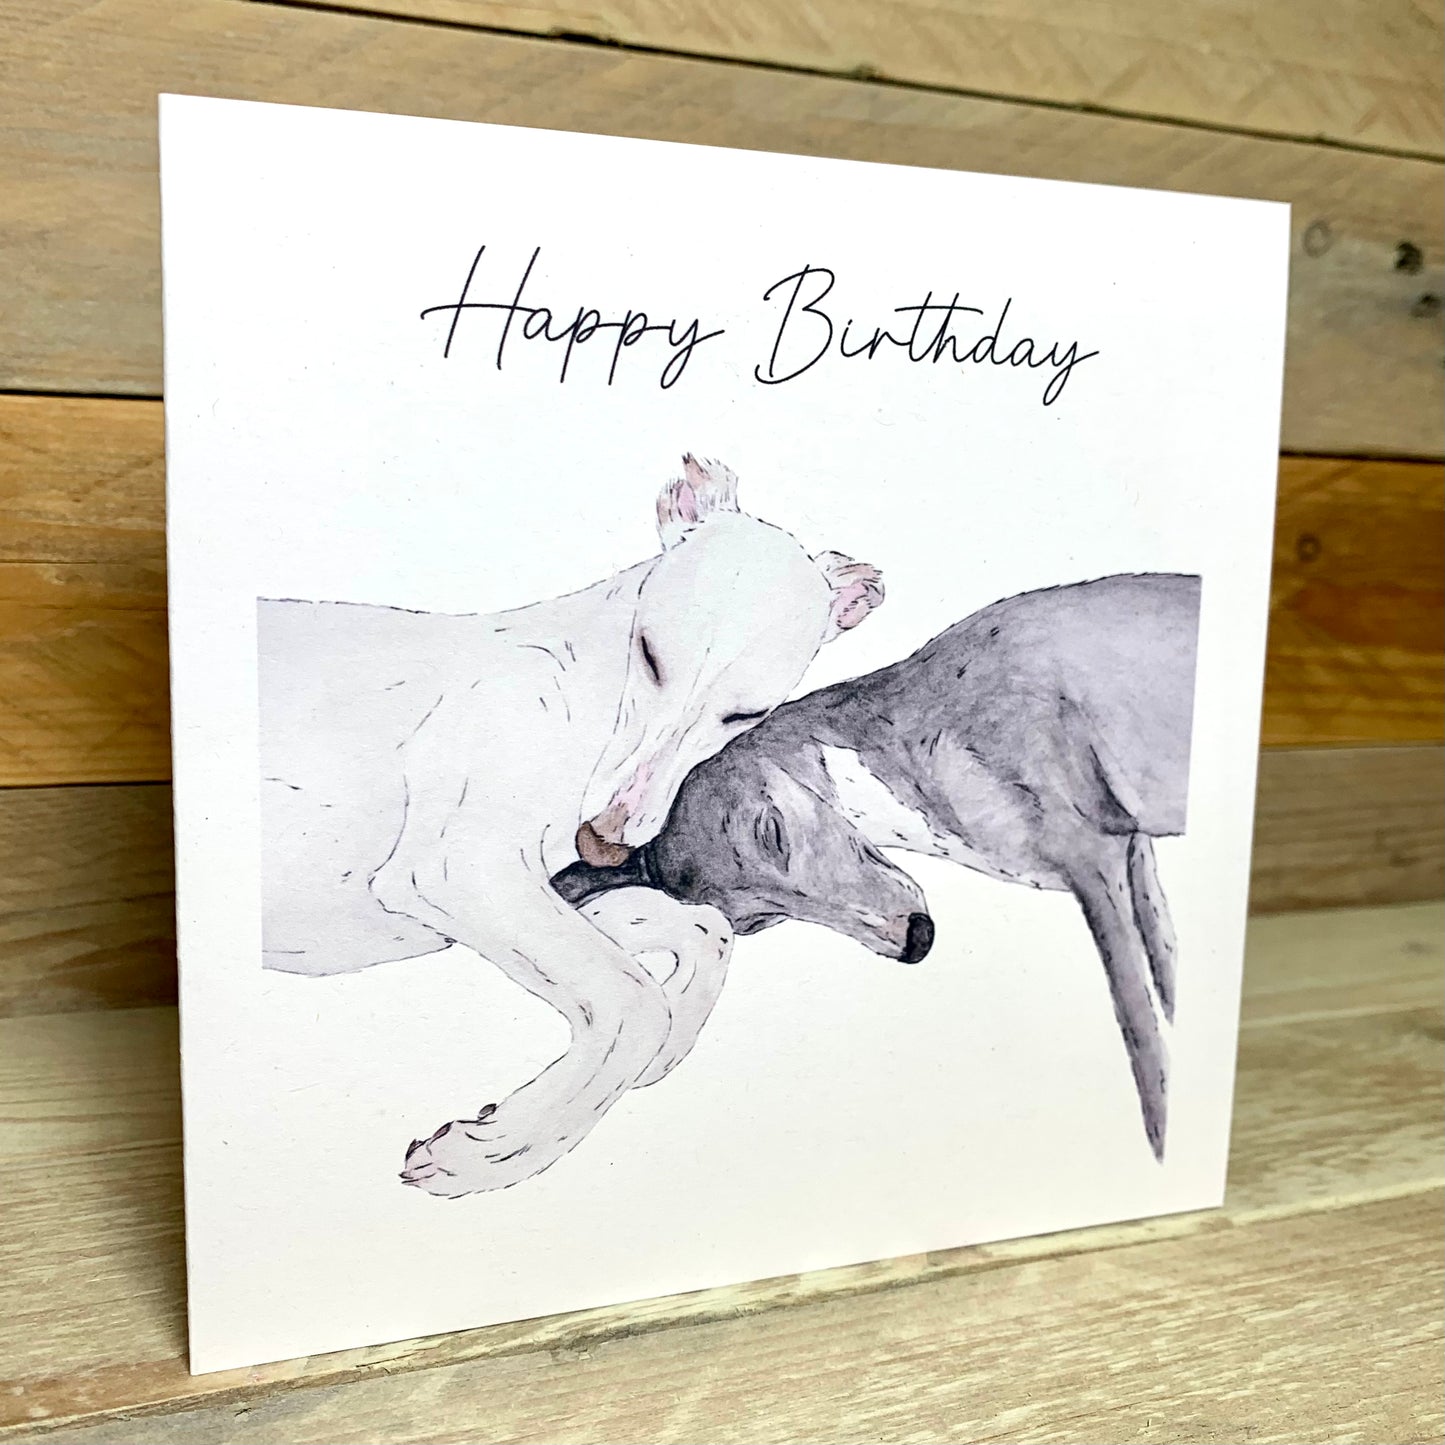 Snuggles Whippet Birthday Card